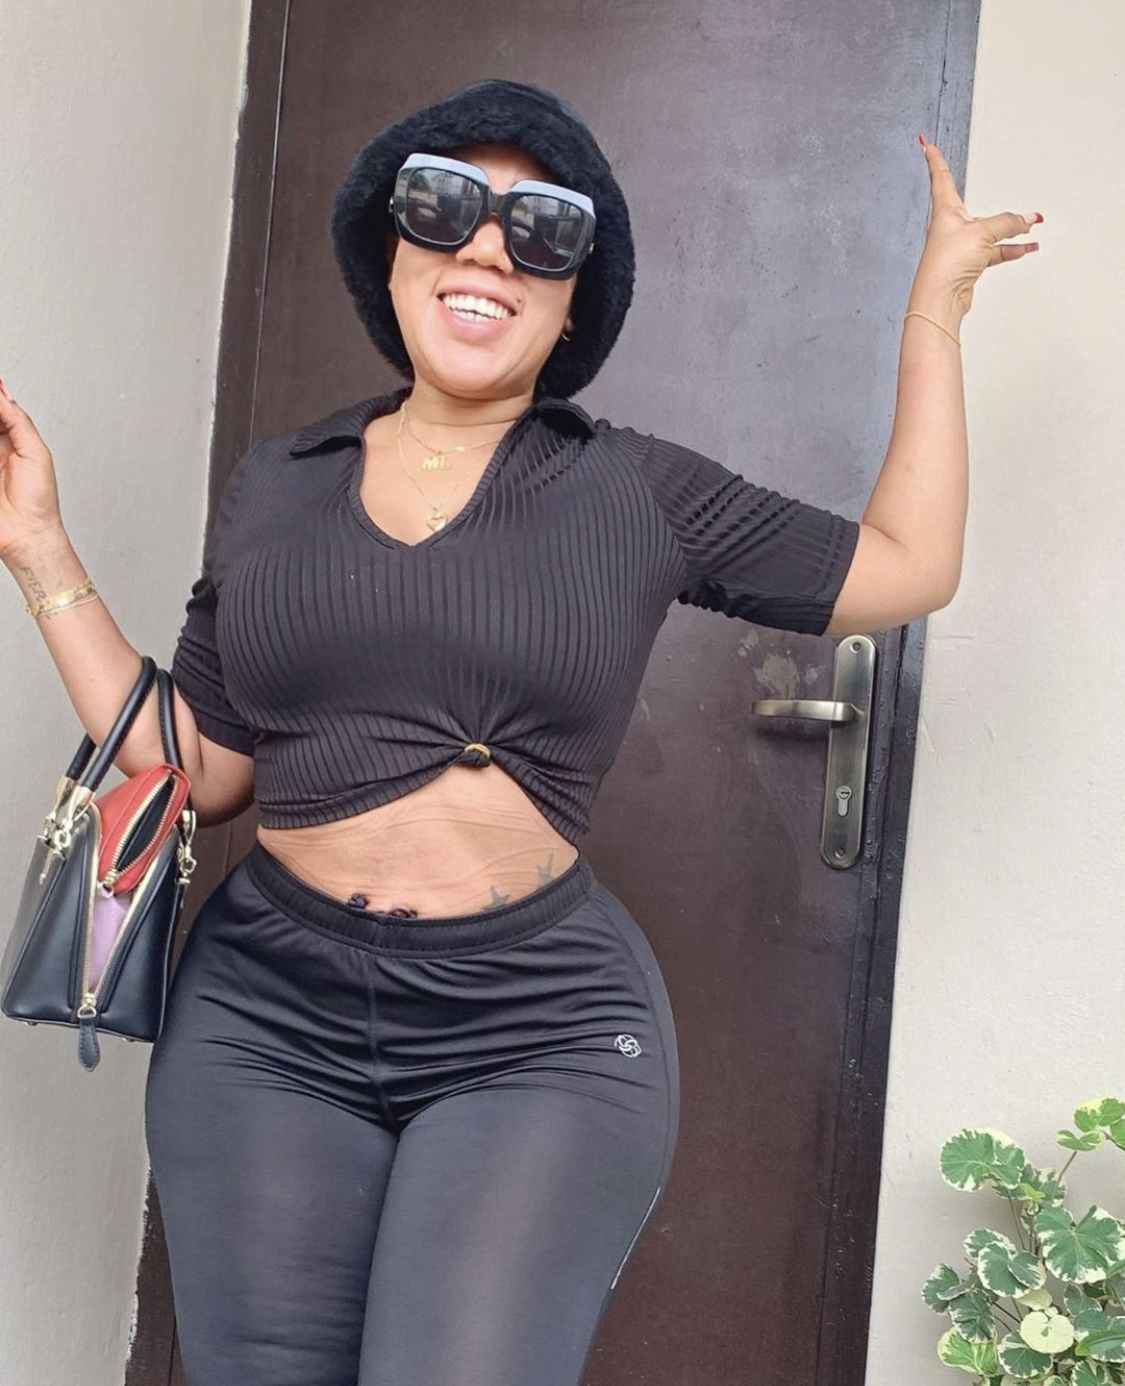 I spend more than 500k on groceries and it’s not enough - Actress Moyo Lawal laments